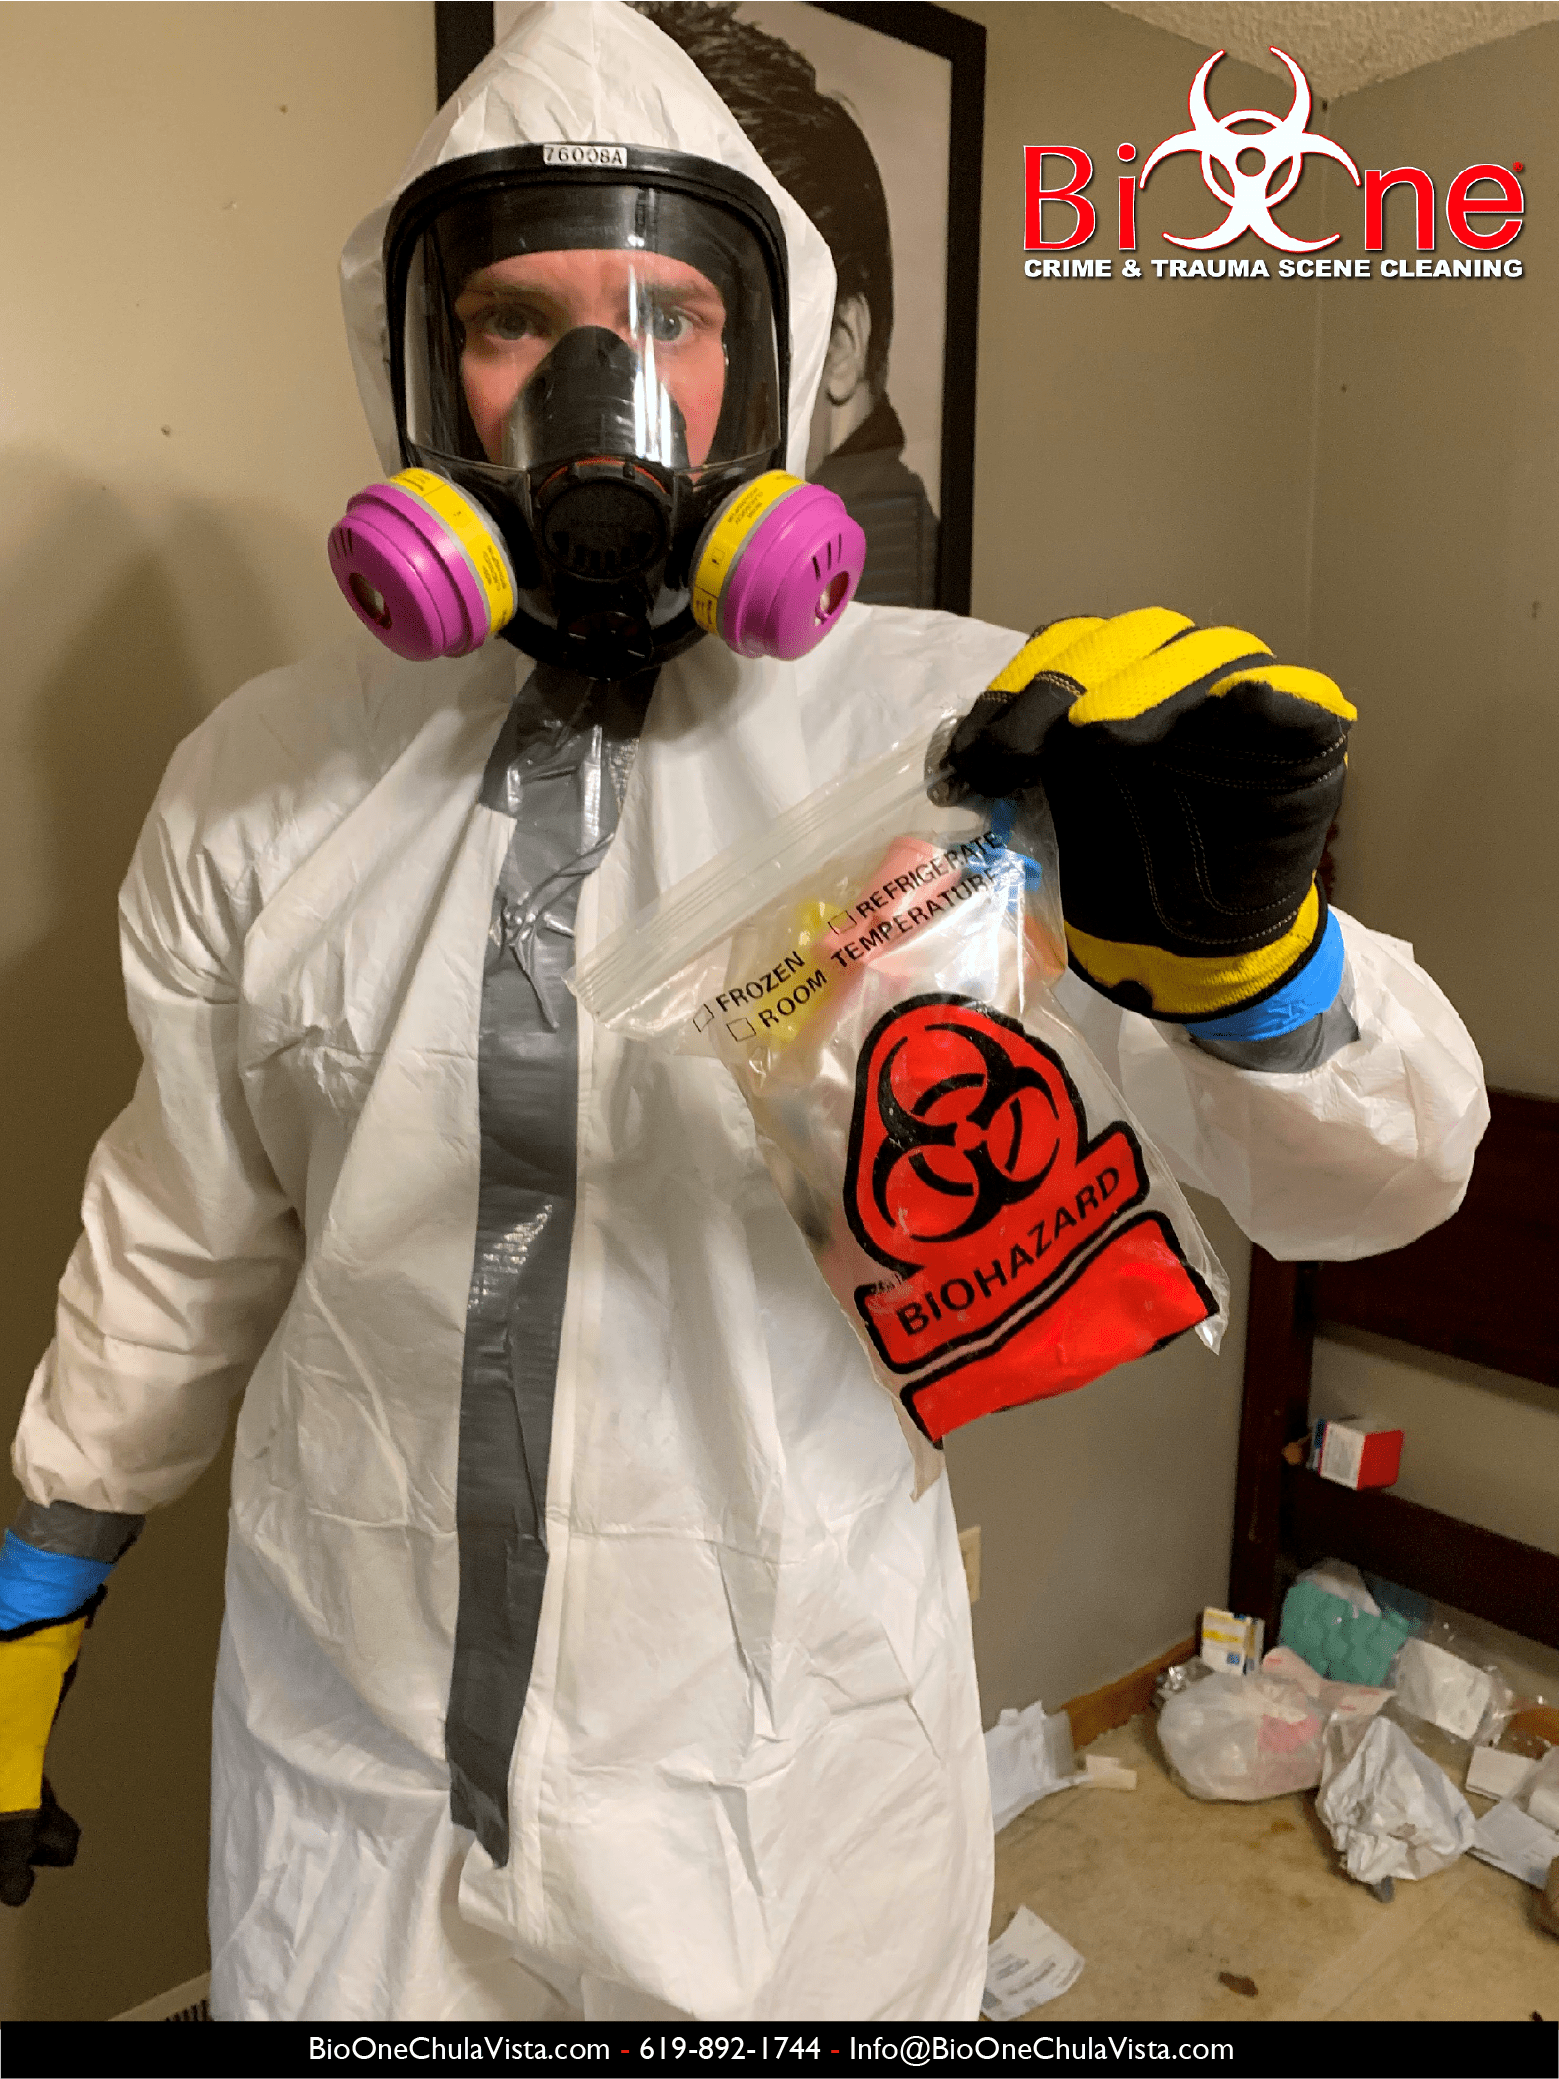 Image shows Bio-One technician holding a small bag of biohazardous waste.